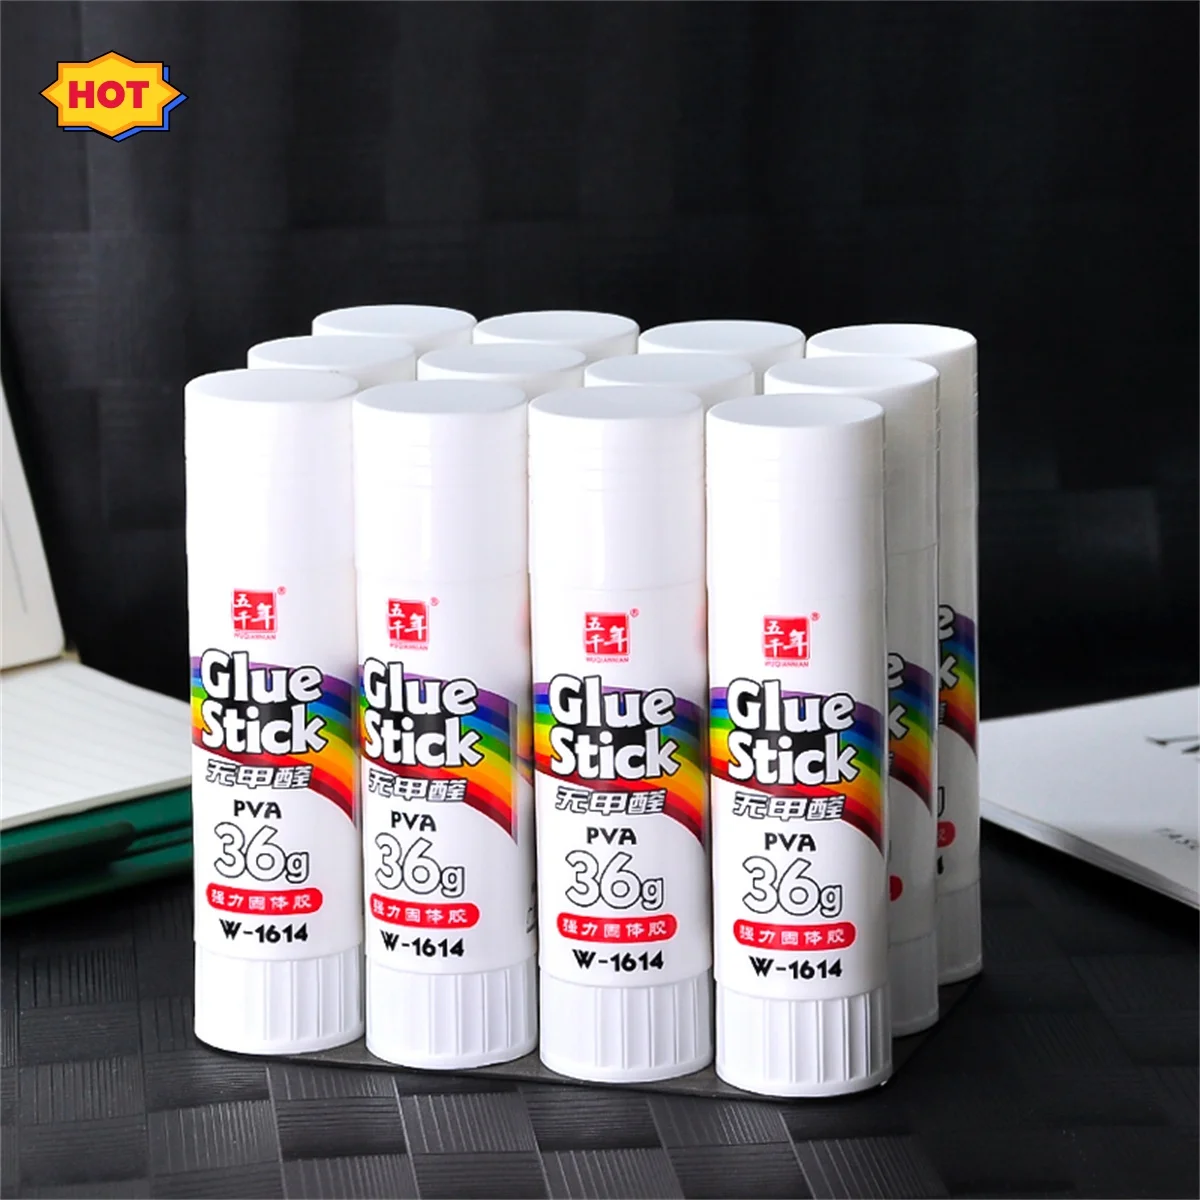 

9g Glue sticks Solid School glue High Efficiency Adhesion for Office&Scrapbooking Essentials Perfect for Crafts Long Lasting